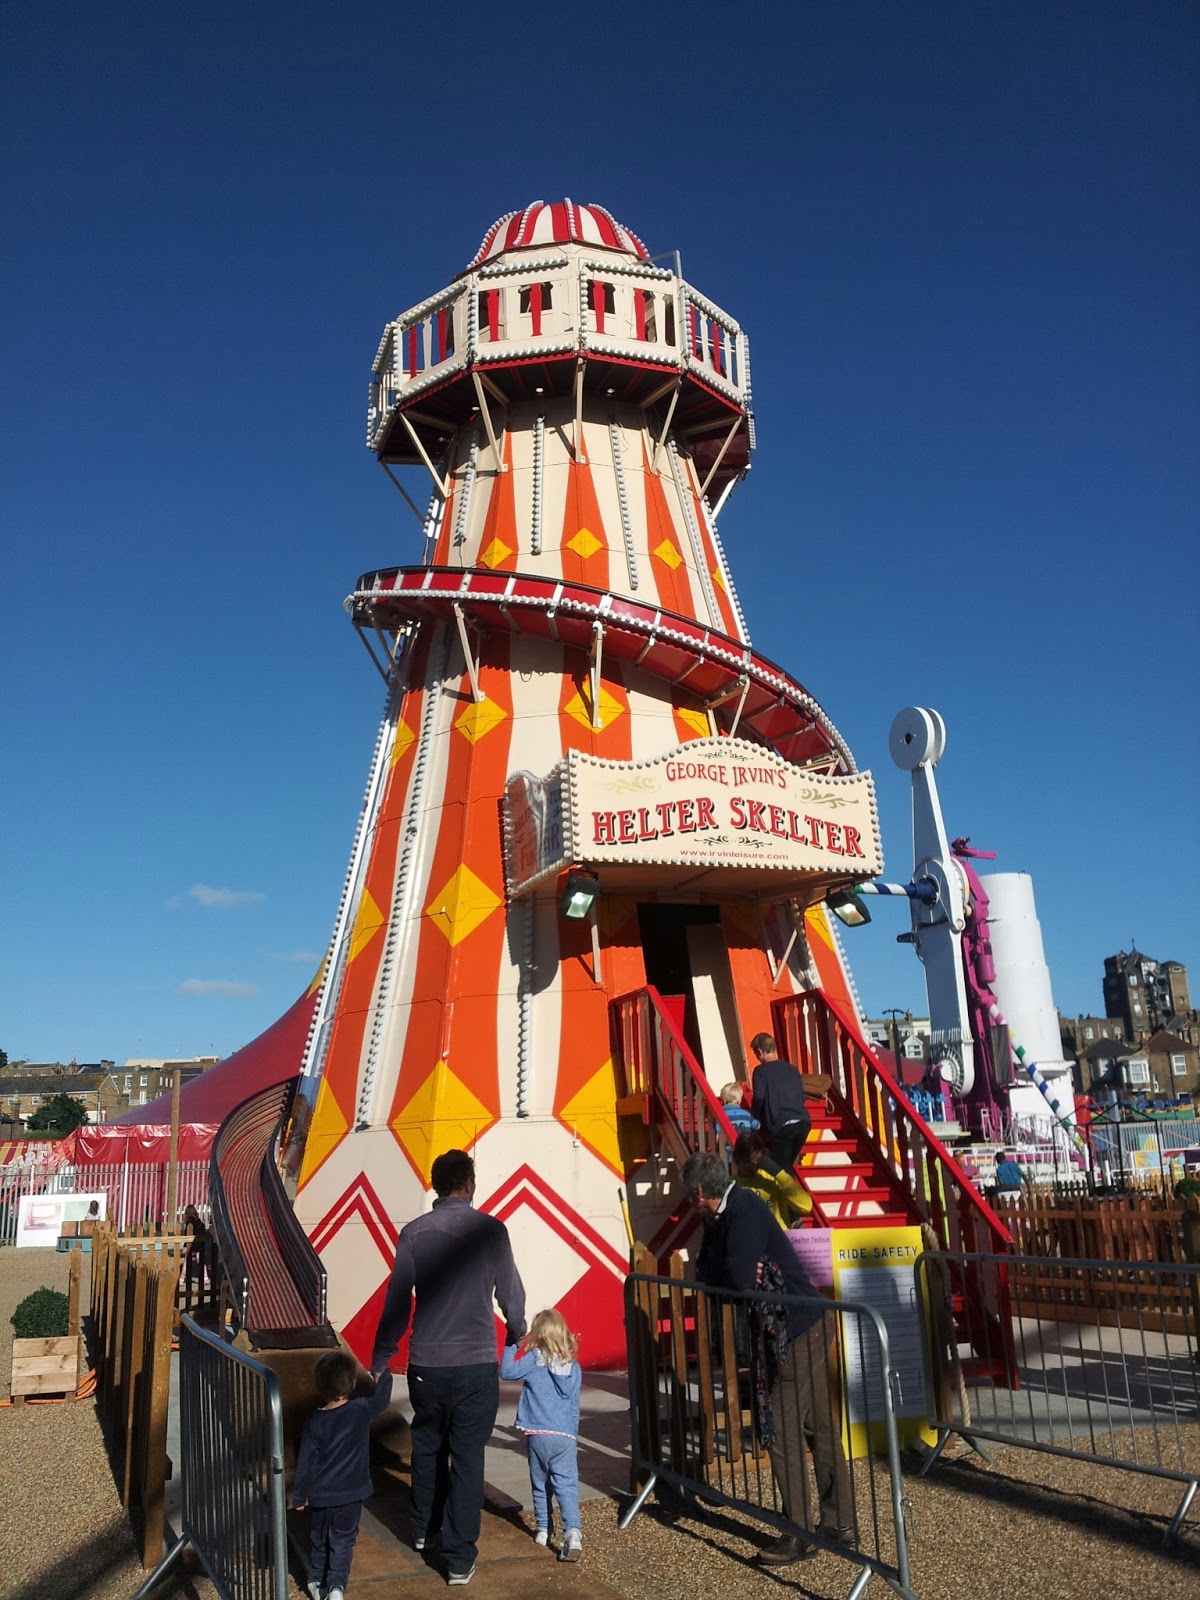 thanetonline: A few pictures of Dreamland Margate today